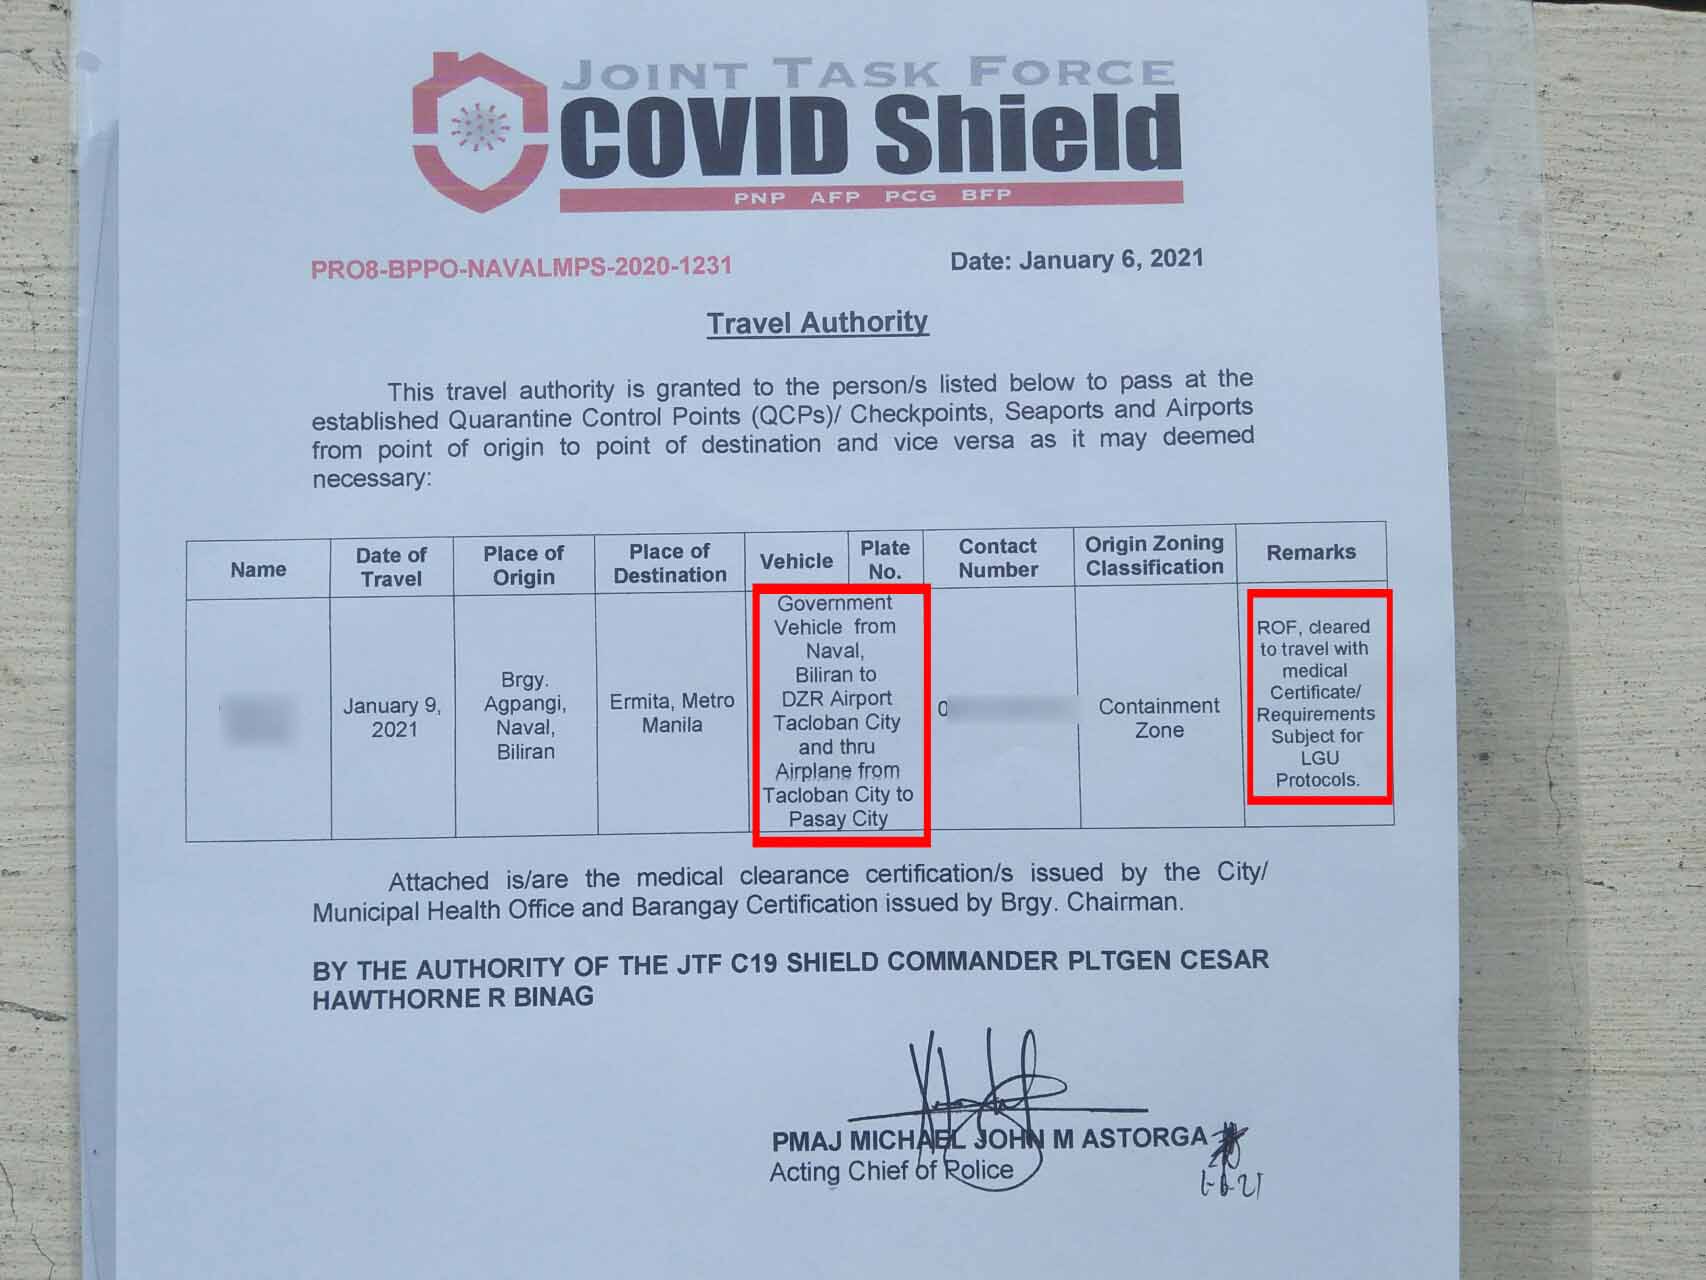 COVID Shield Travel Authority issued by the NTF ELCAC Joint Task Force.